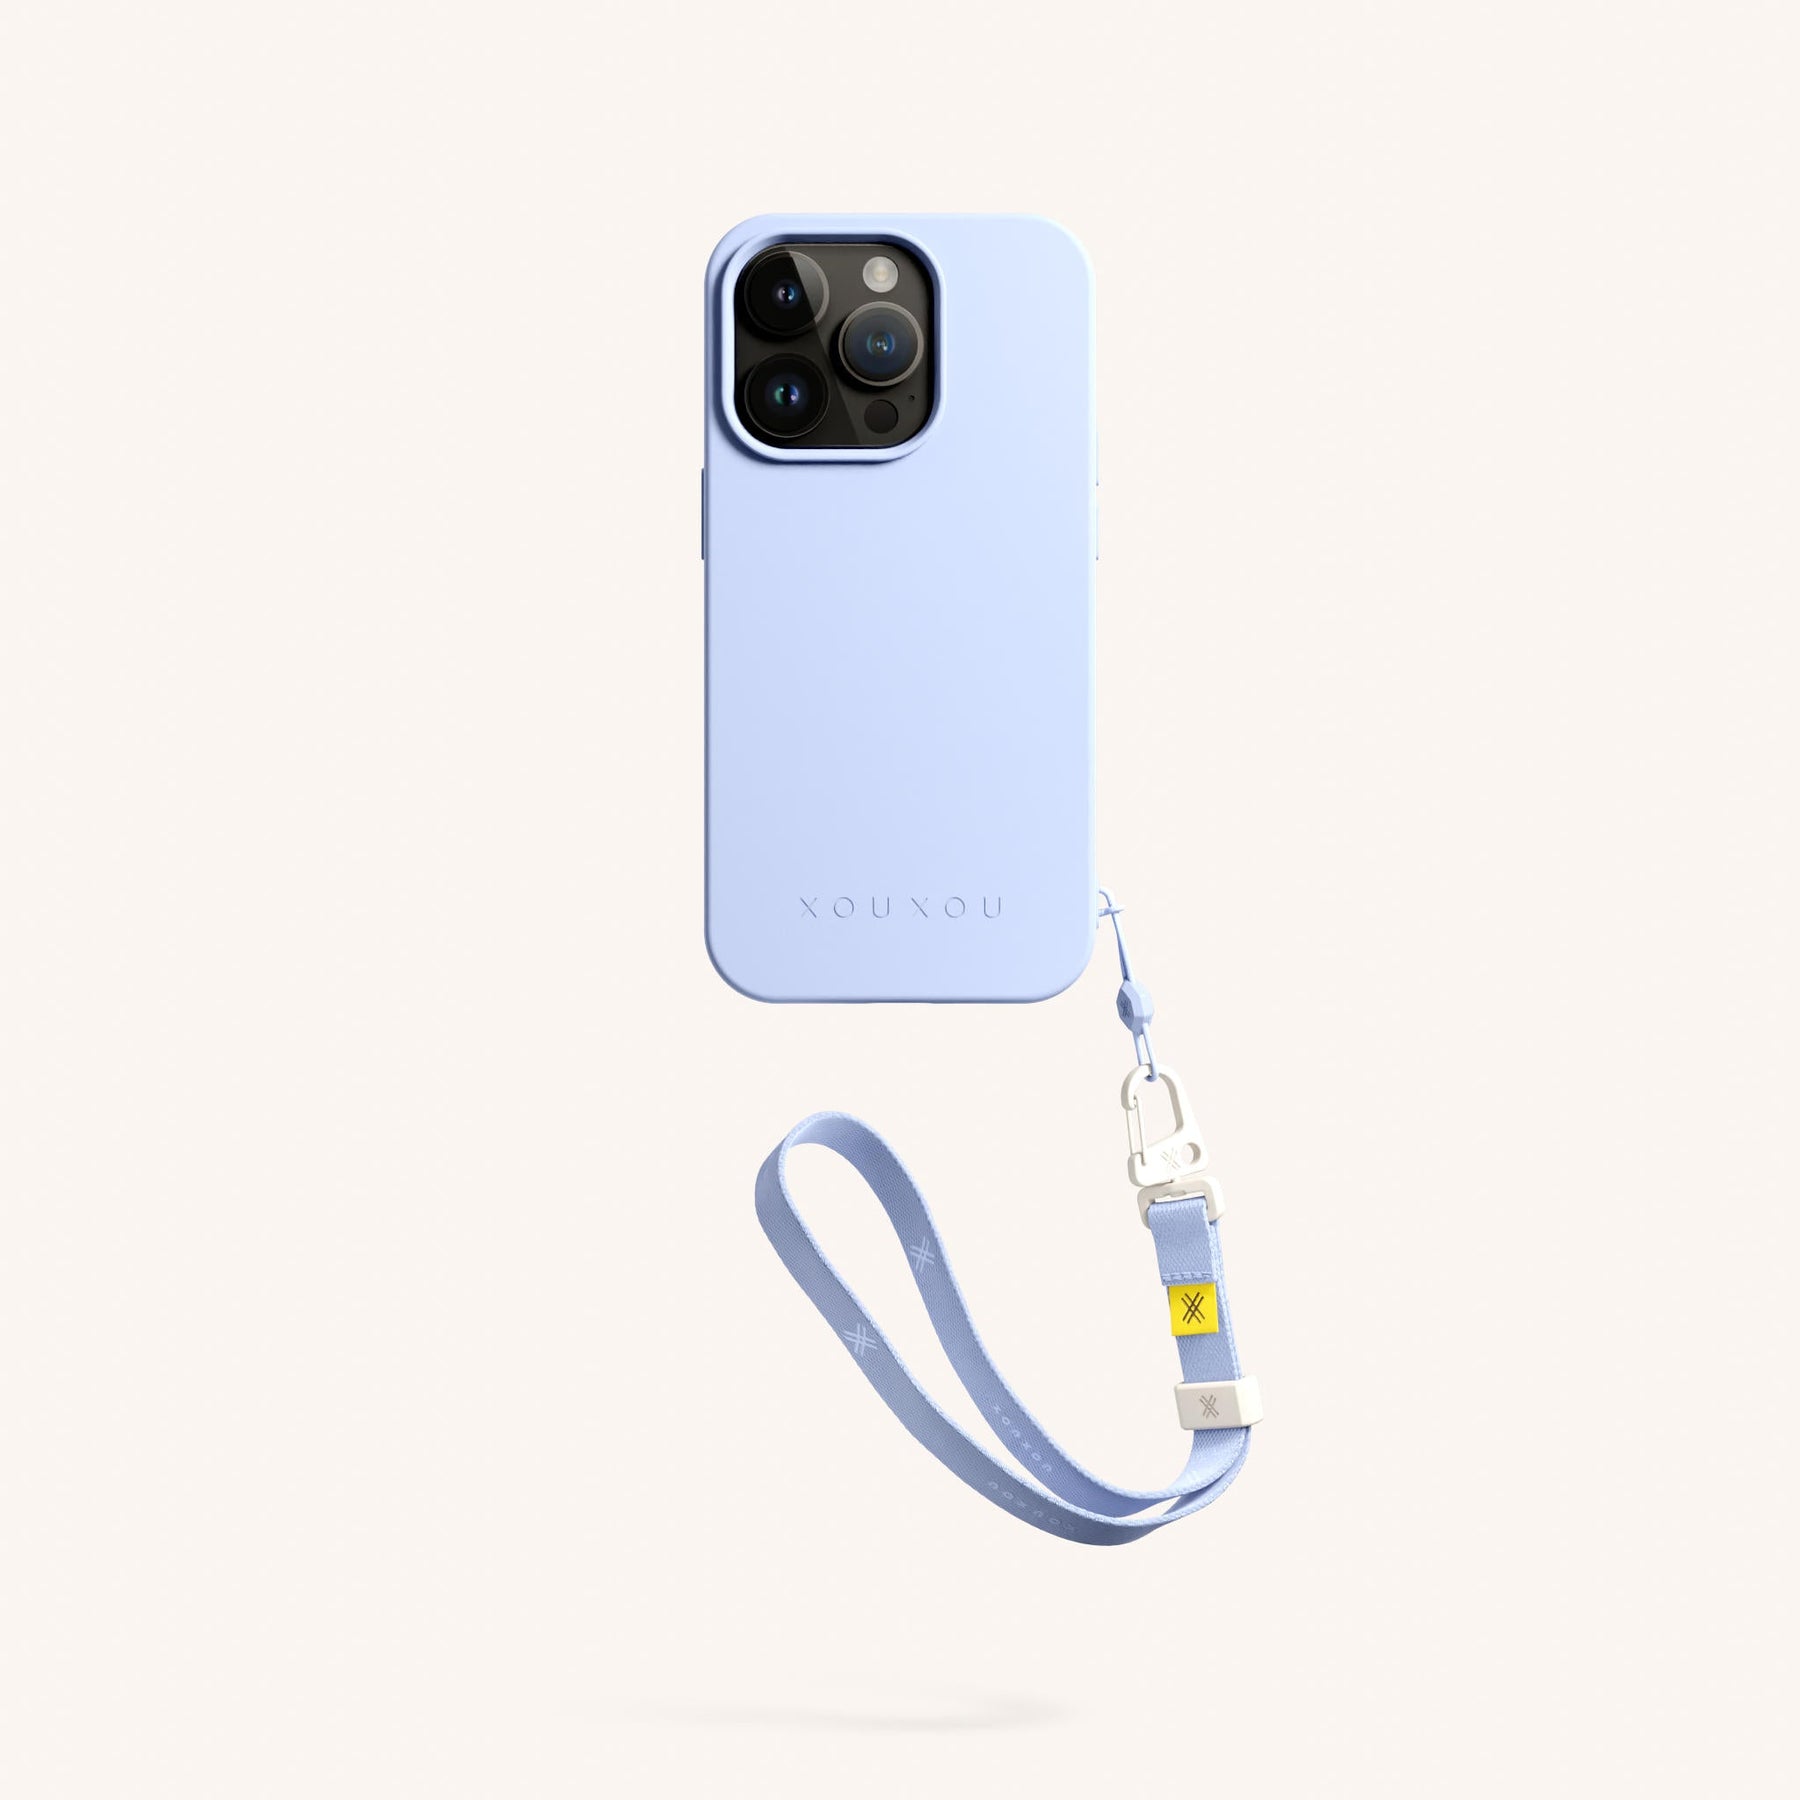 Phone Case with Wrist Strap in Baby Blue